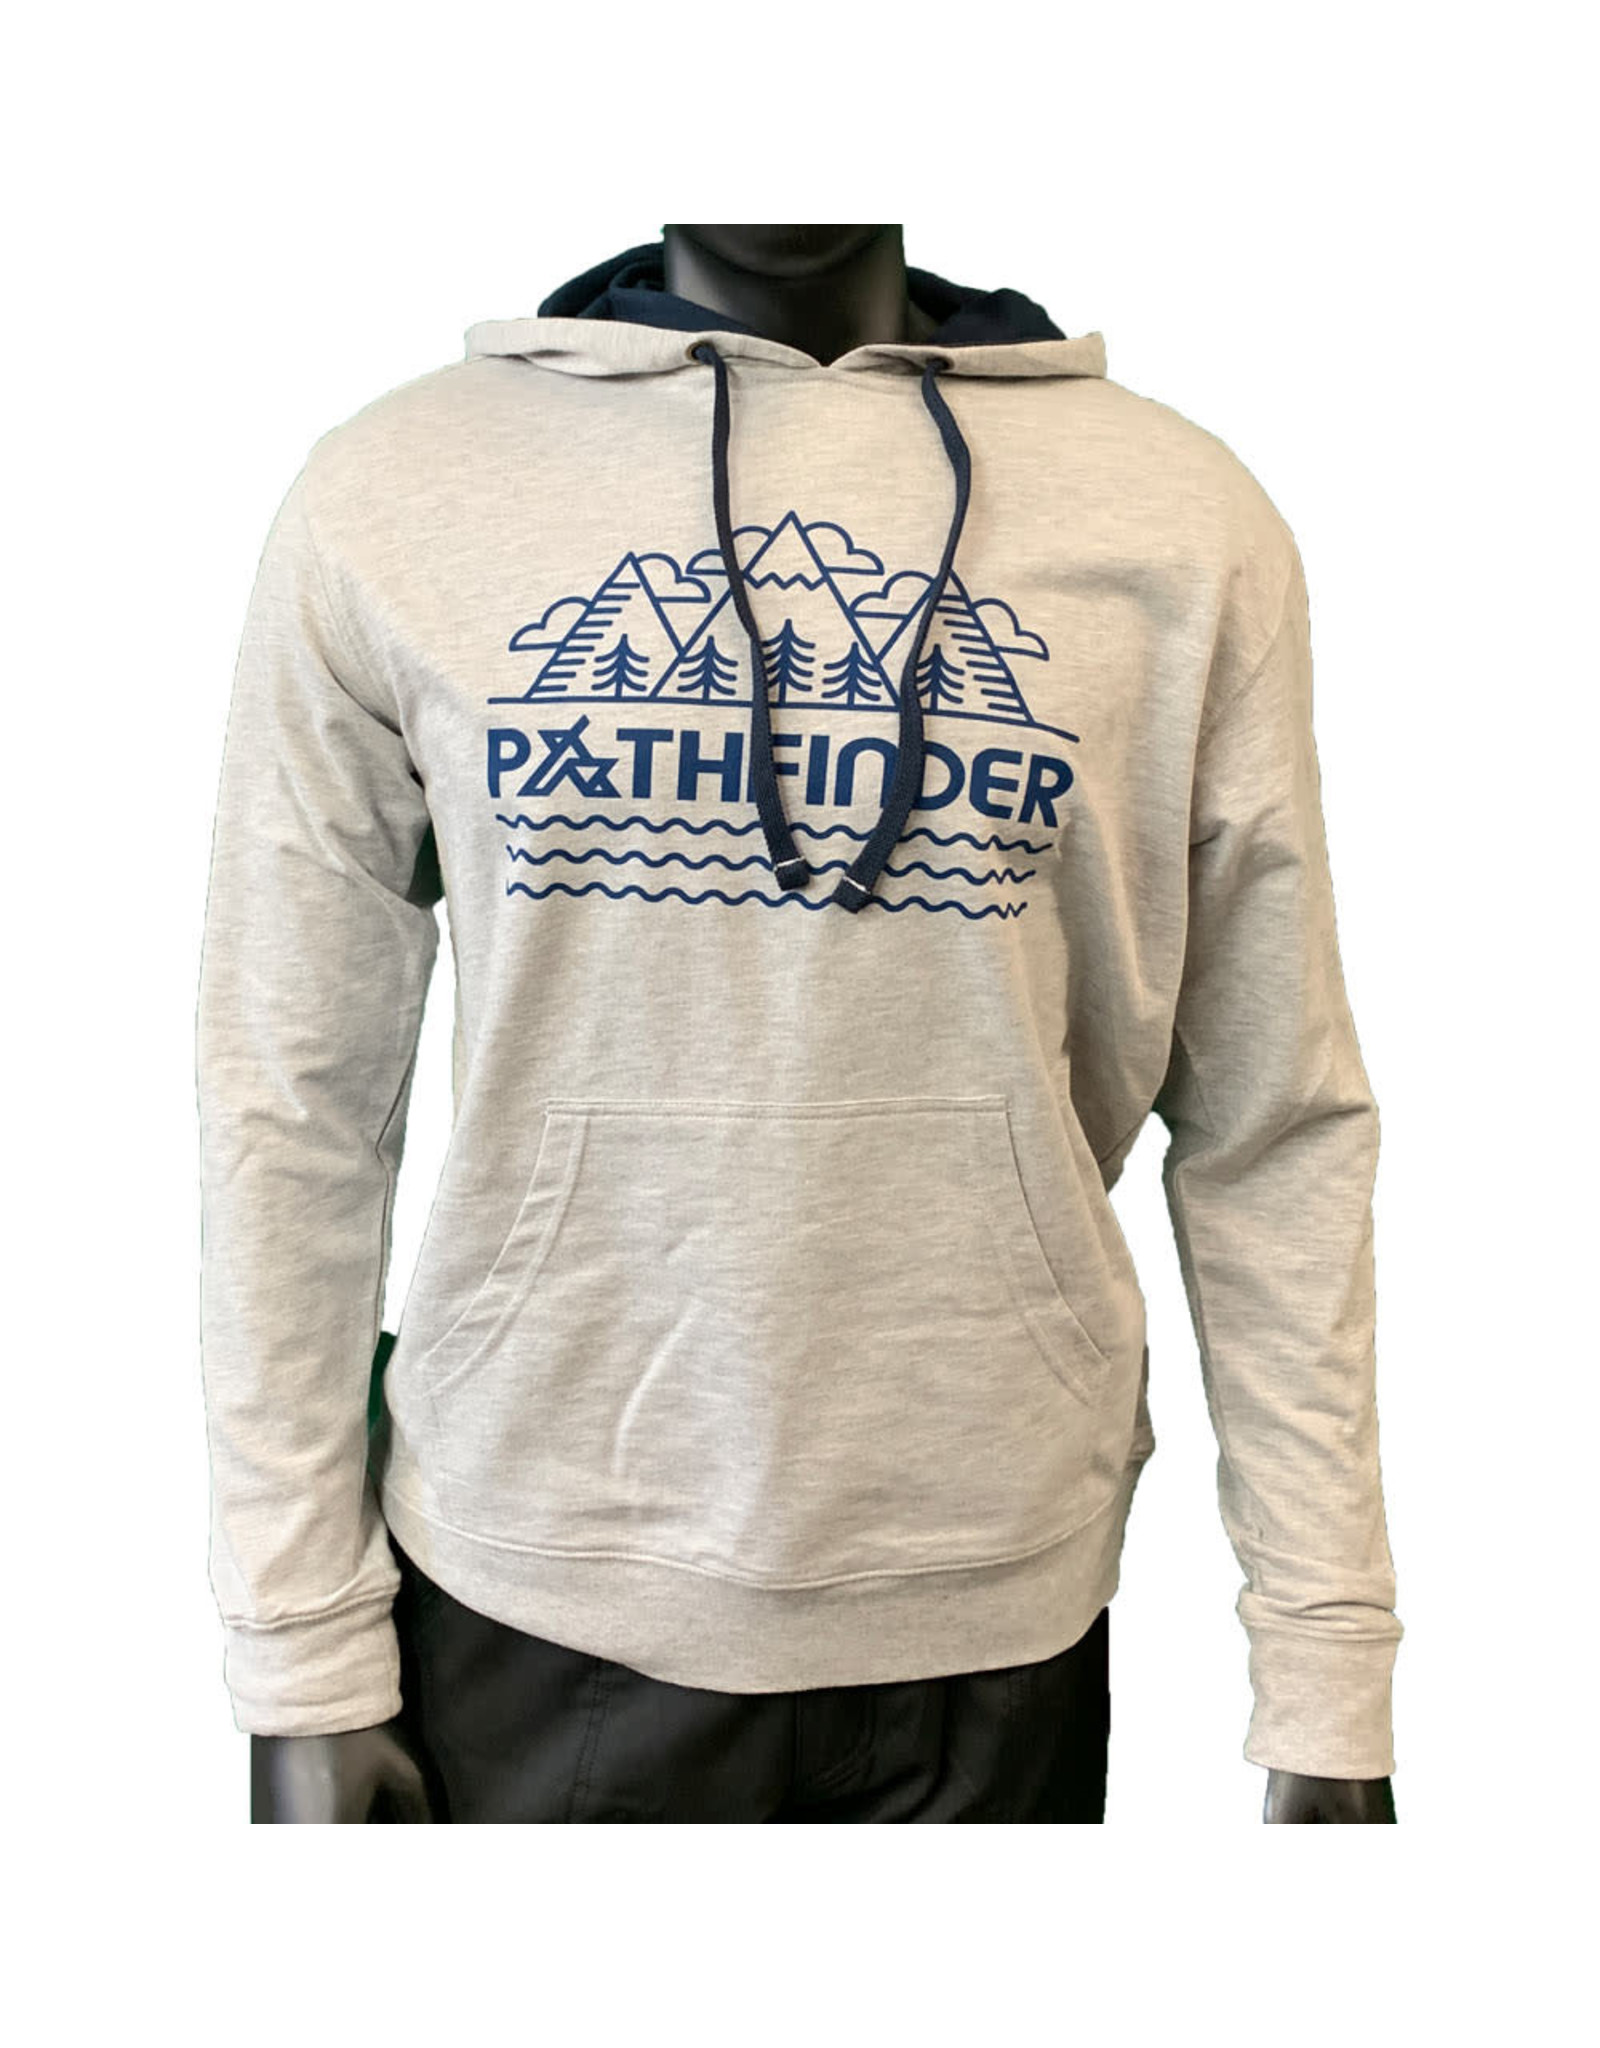 Pathfinder Linescape French Terry Hooded Pullover Heather Grey/Navy